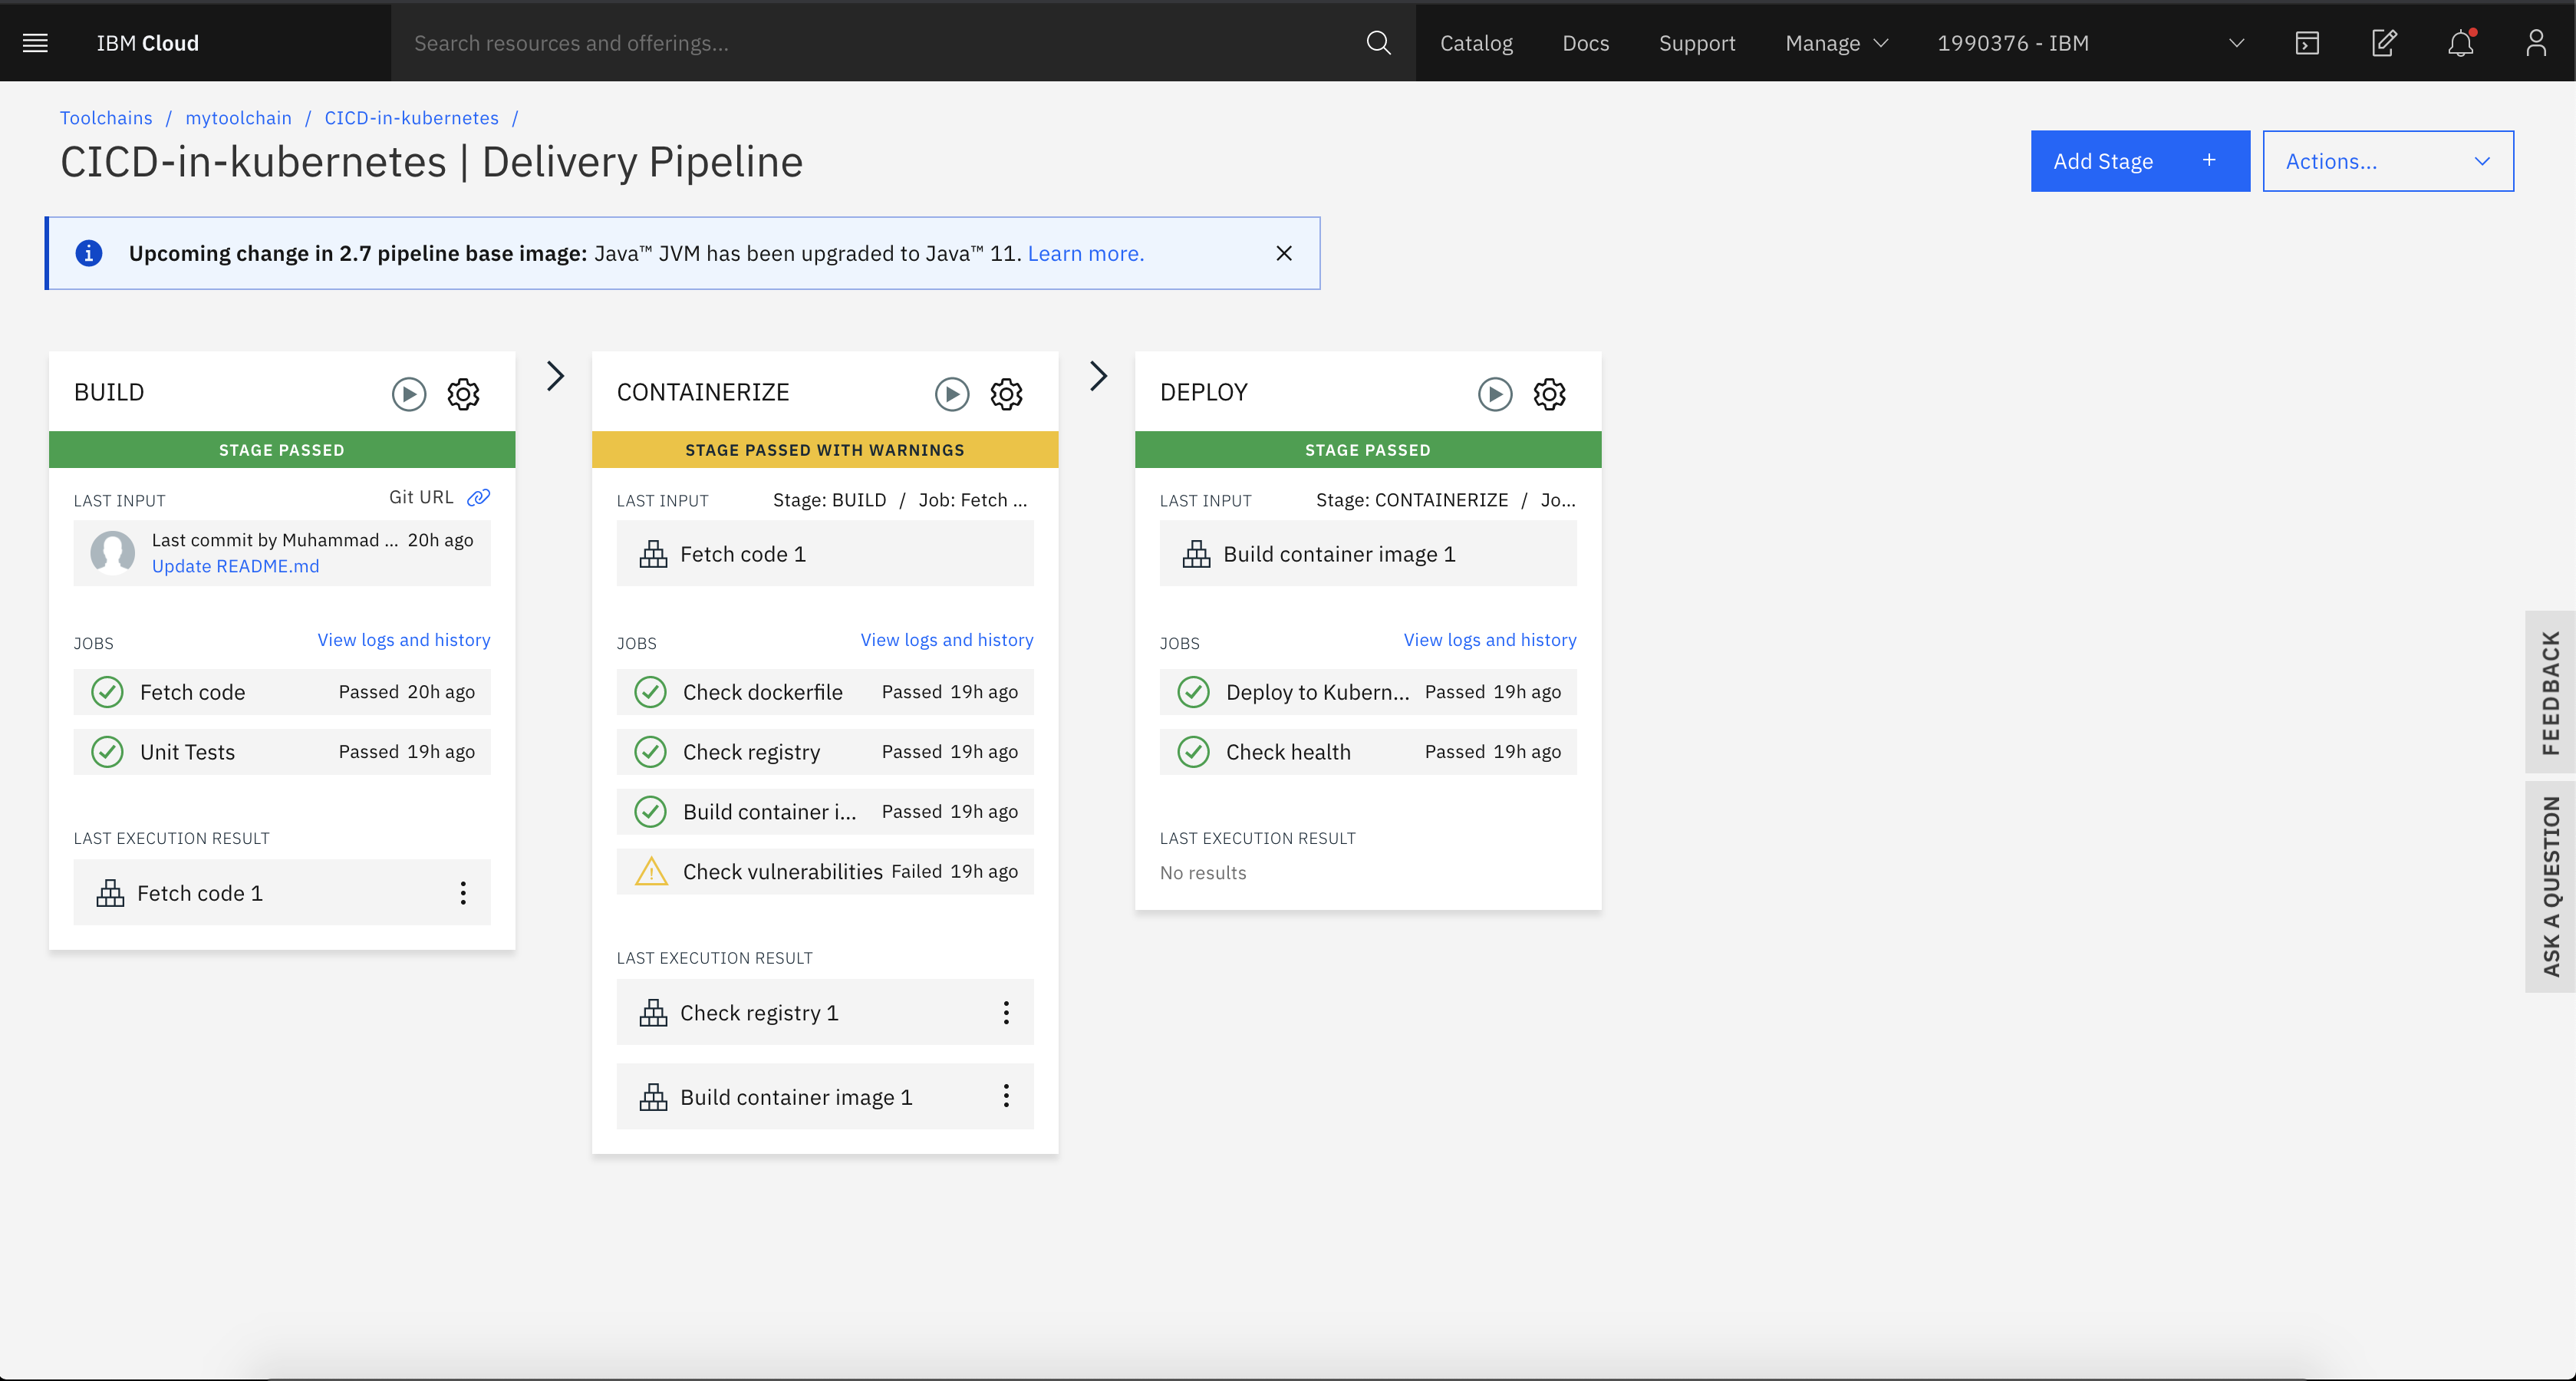 Screen capture of the Delivery Pipeline status page